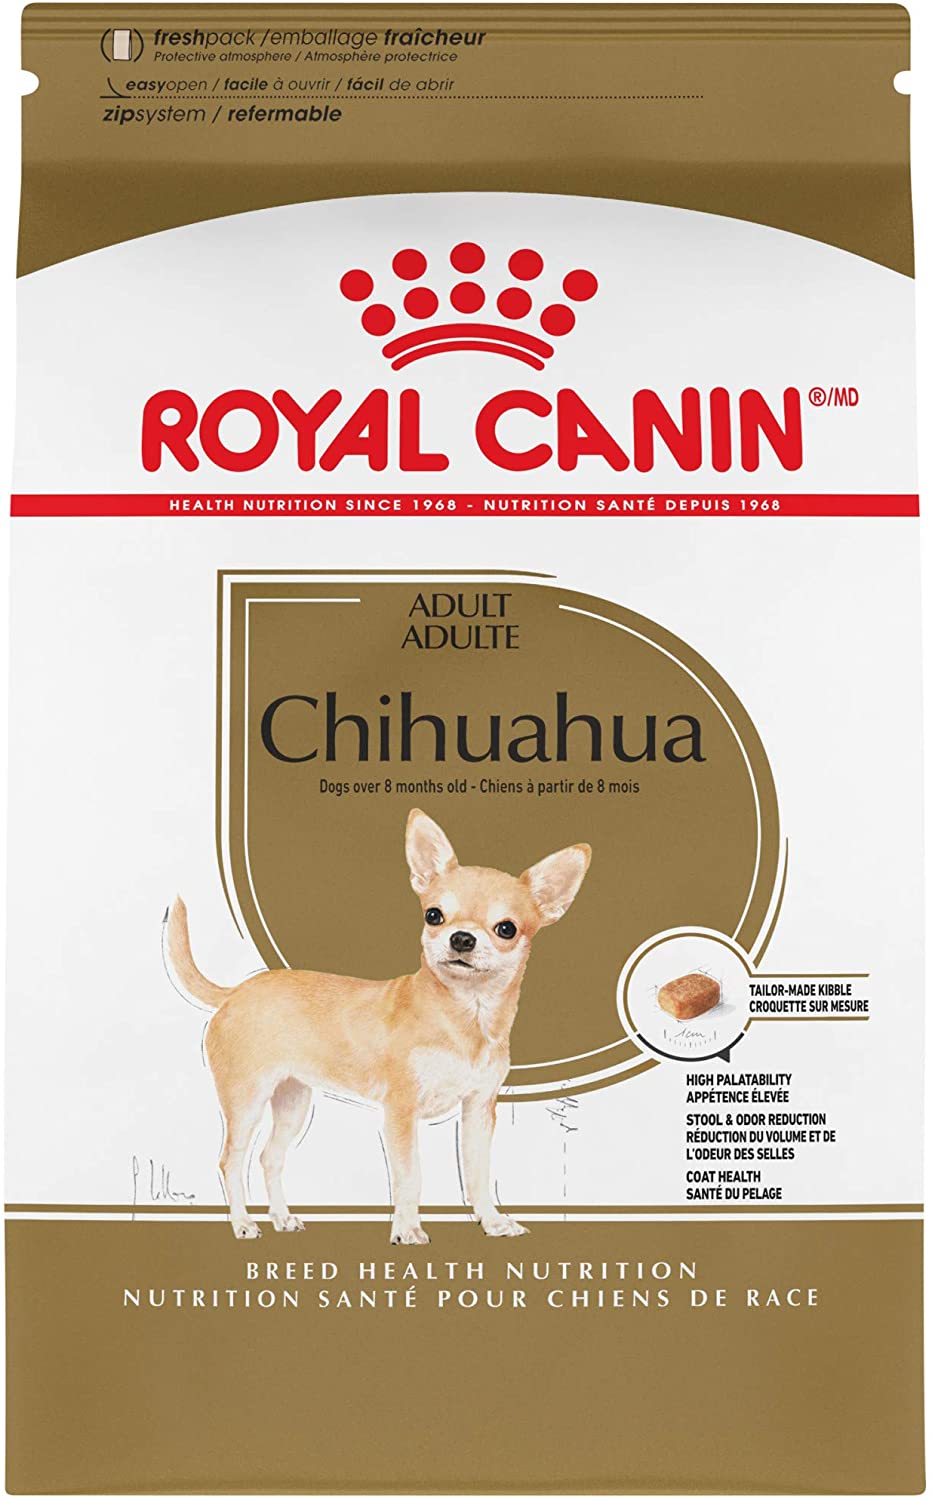 Royal Canin Adult Dry Dog Food for Chihuahua